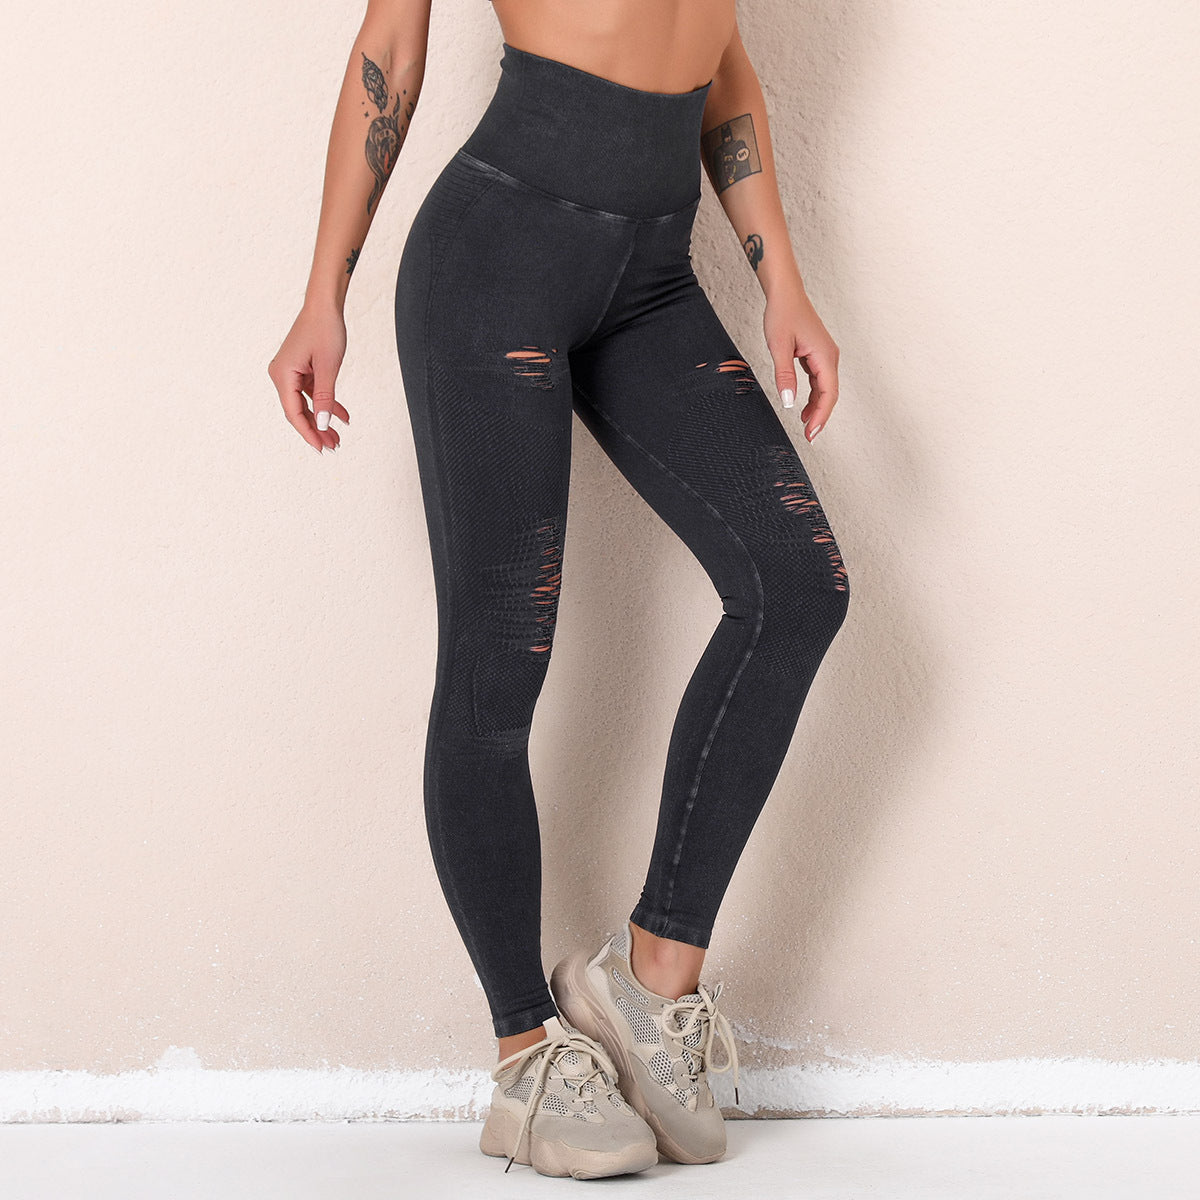 Washed Yoga Pants Ripped Hollow-out Seamless High Waist Sports Ninth Pants Hip Raise Fitness Pants Women